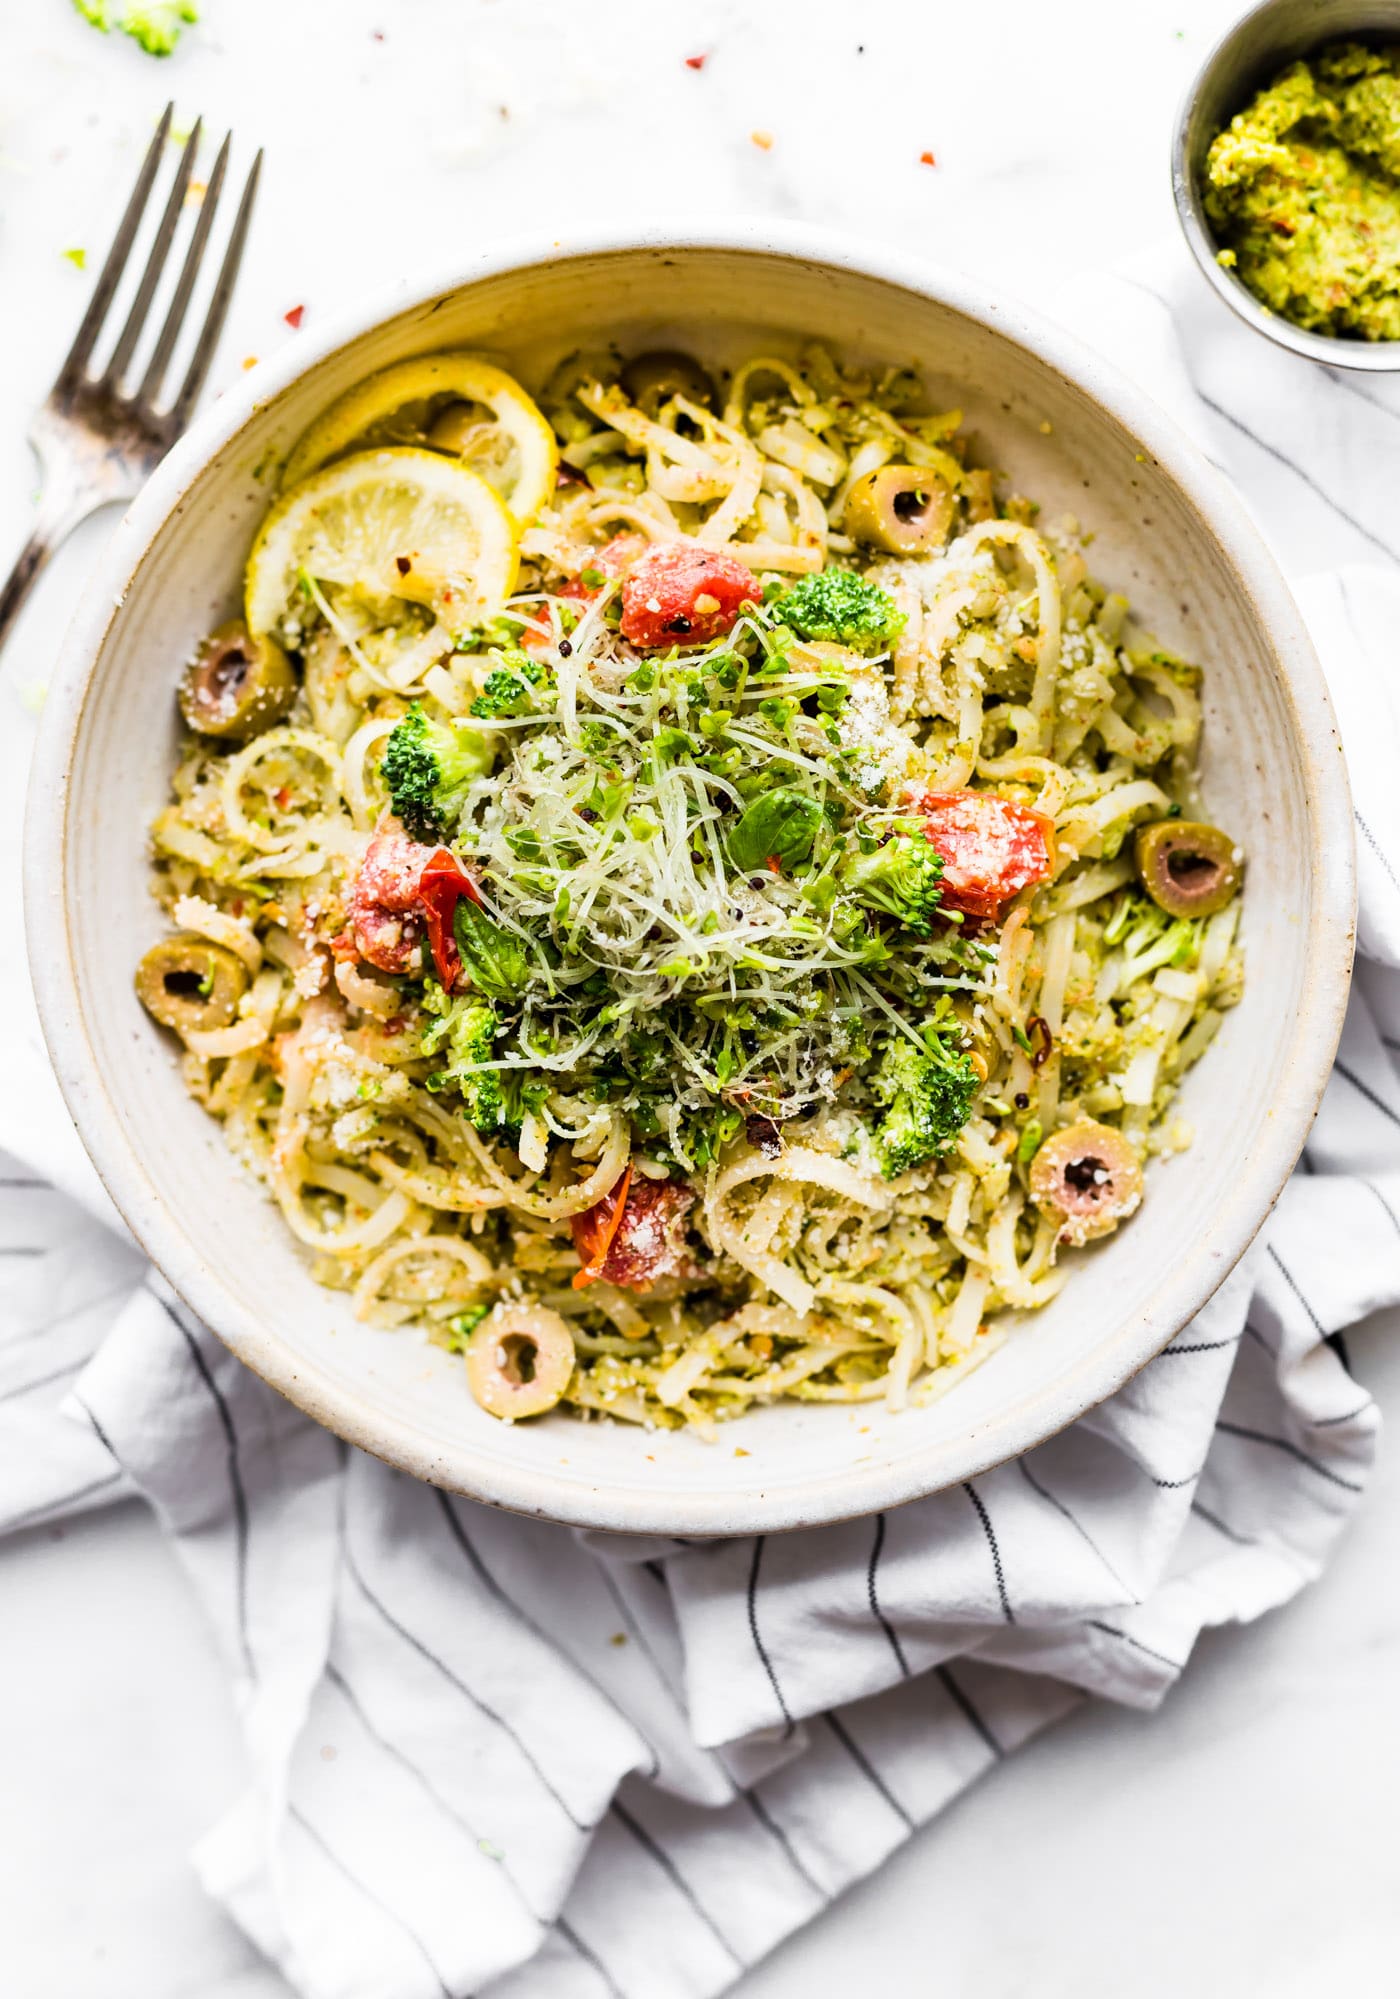 This gluten free Peppery Broccoli Arugula Pesto Pasta is gonna rock your world! A pesto pasta with broccoli and arugula and packed with nutrition and flavor! An easy pasta dinner for a quick weeknight dinner or healthy lunch! Ready in under 30 minutes and vegan friendly option. www.cottercrunch.com